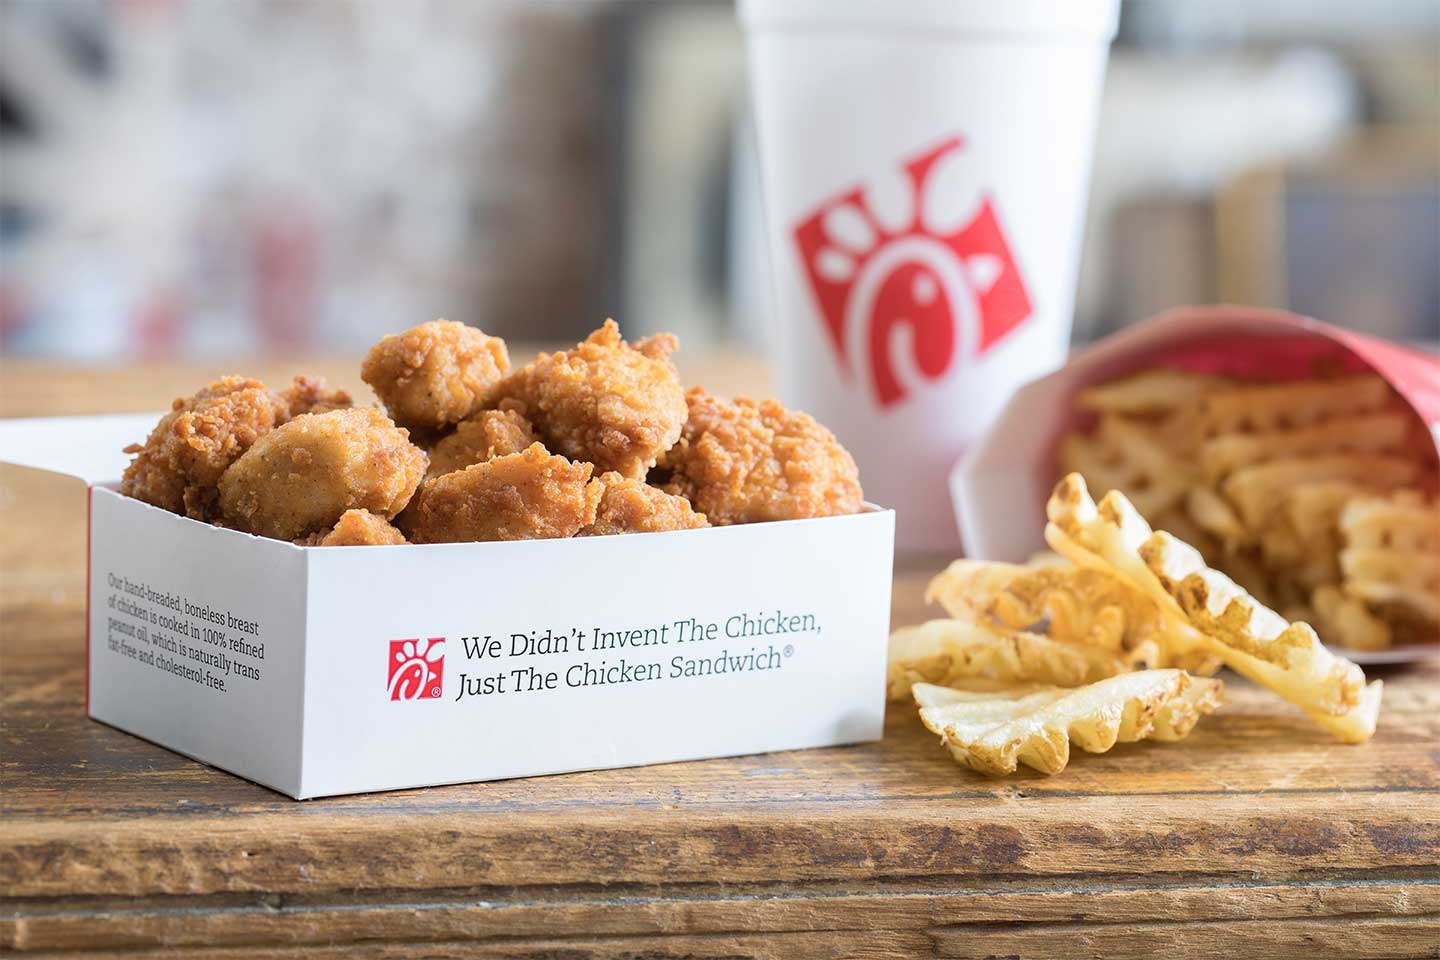 Mark Your Calendar: Free Chick-Fil-A Nuggets This January in Chic Fil A 2020 Calendars